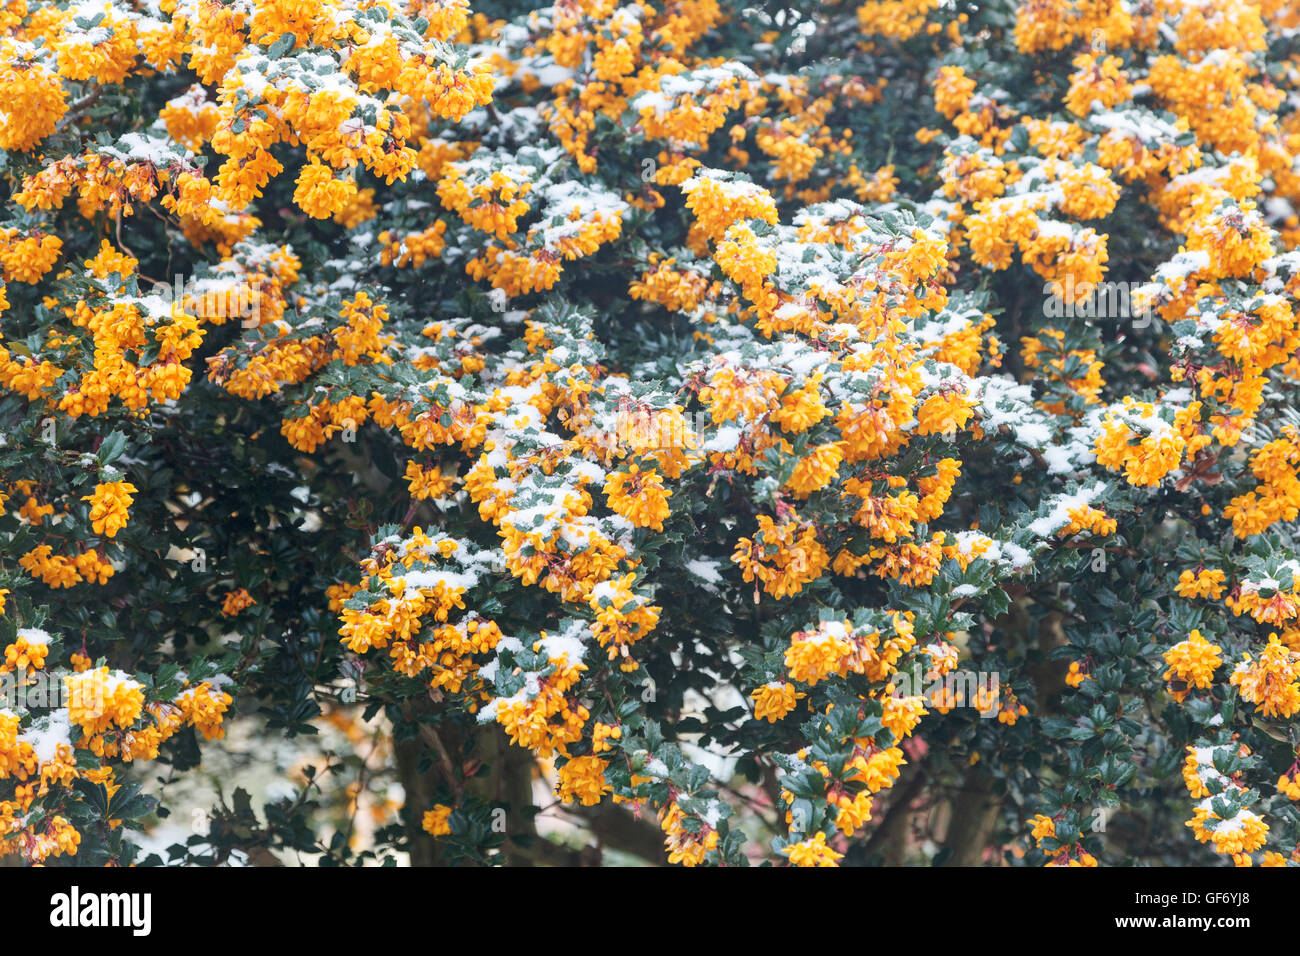 Late April snow on orange Pyracantha (firethorn) tree in flower in UK garden Stock Photo